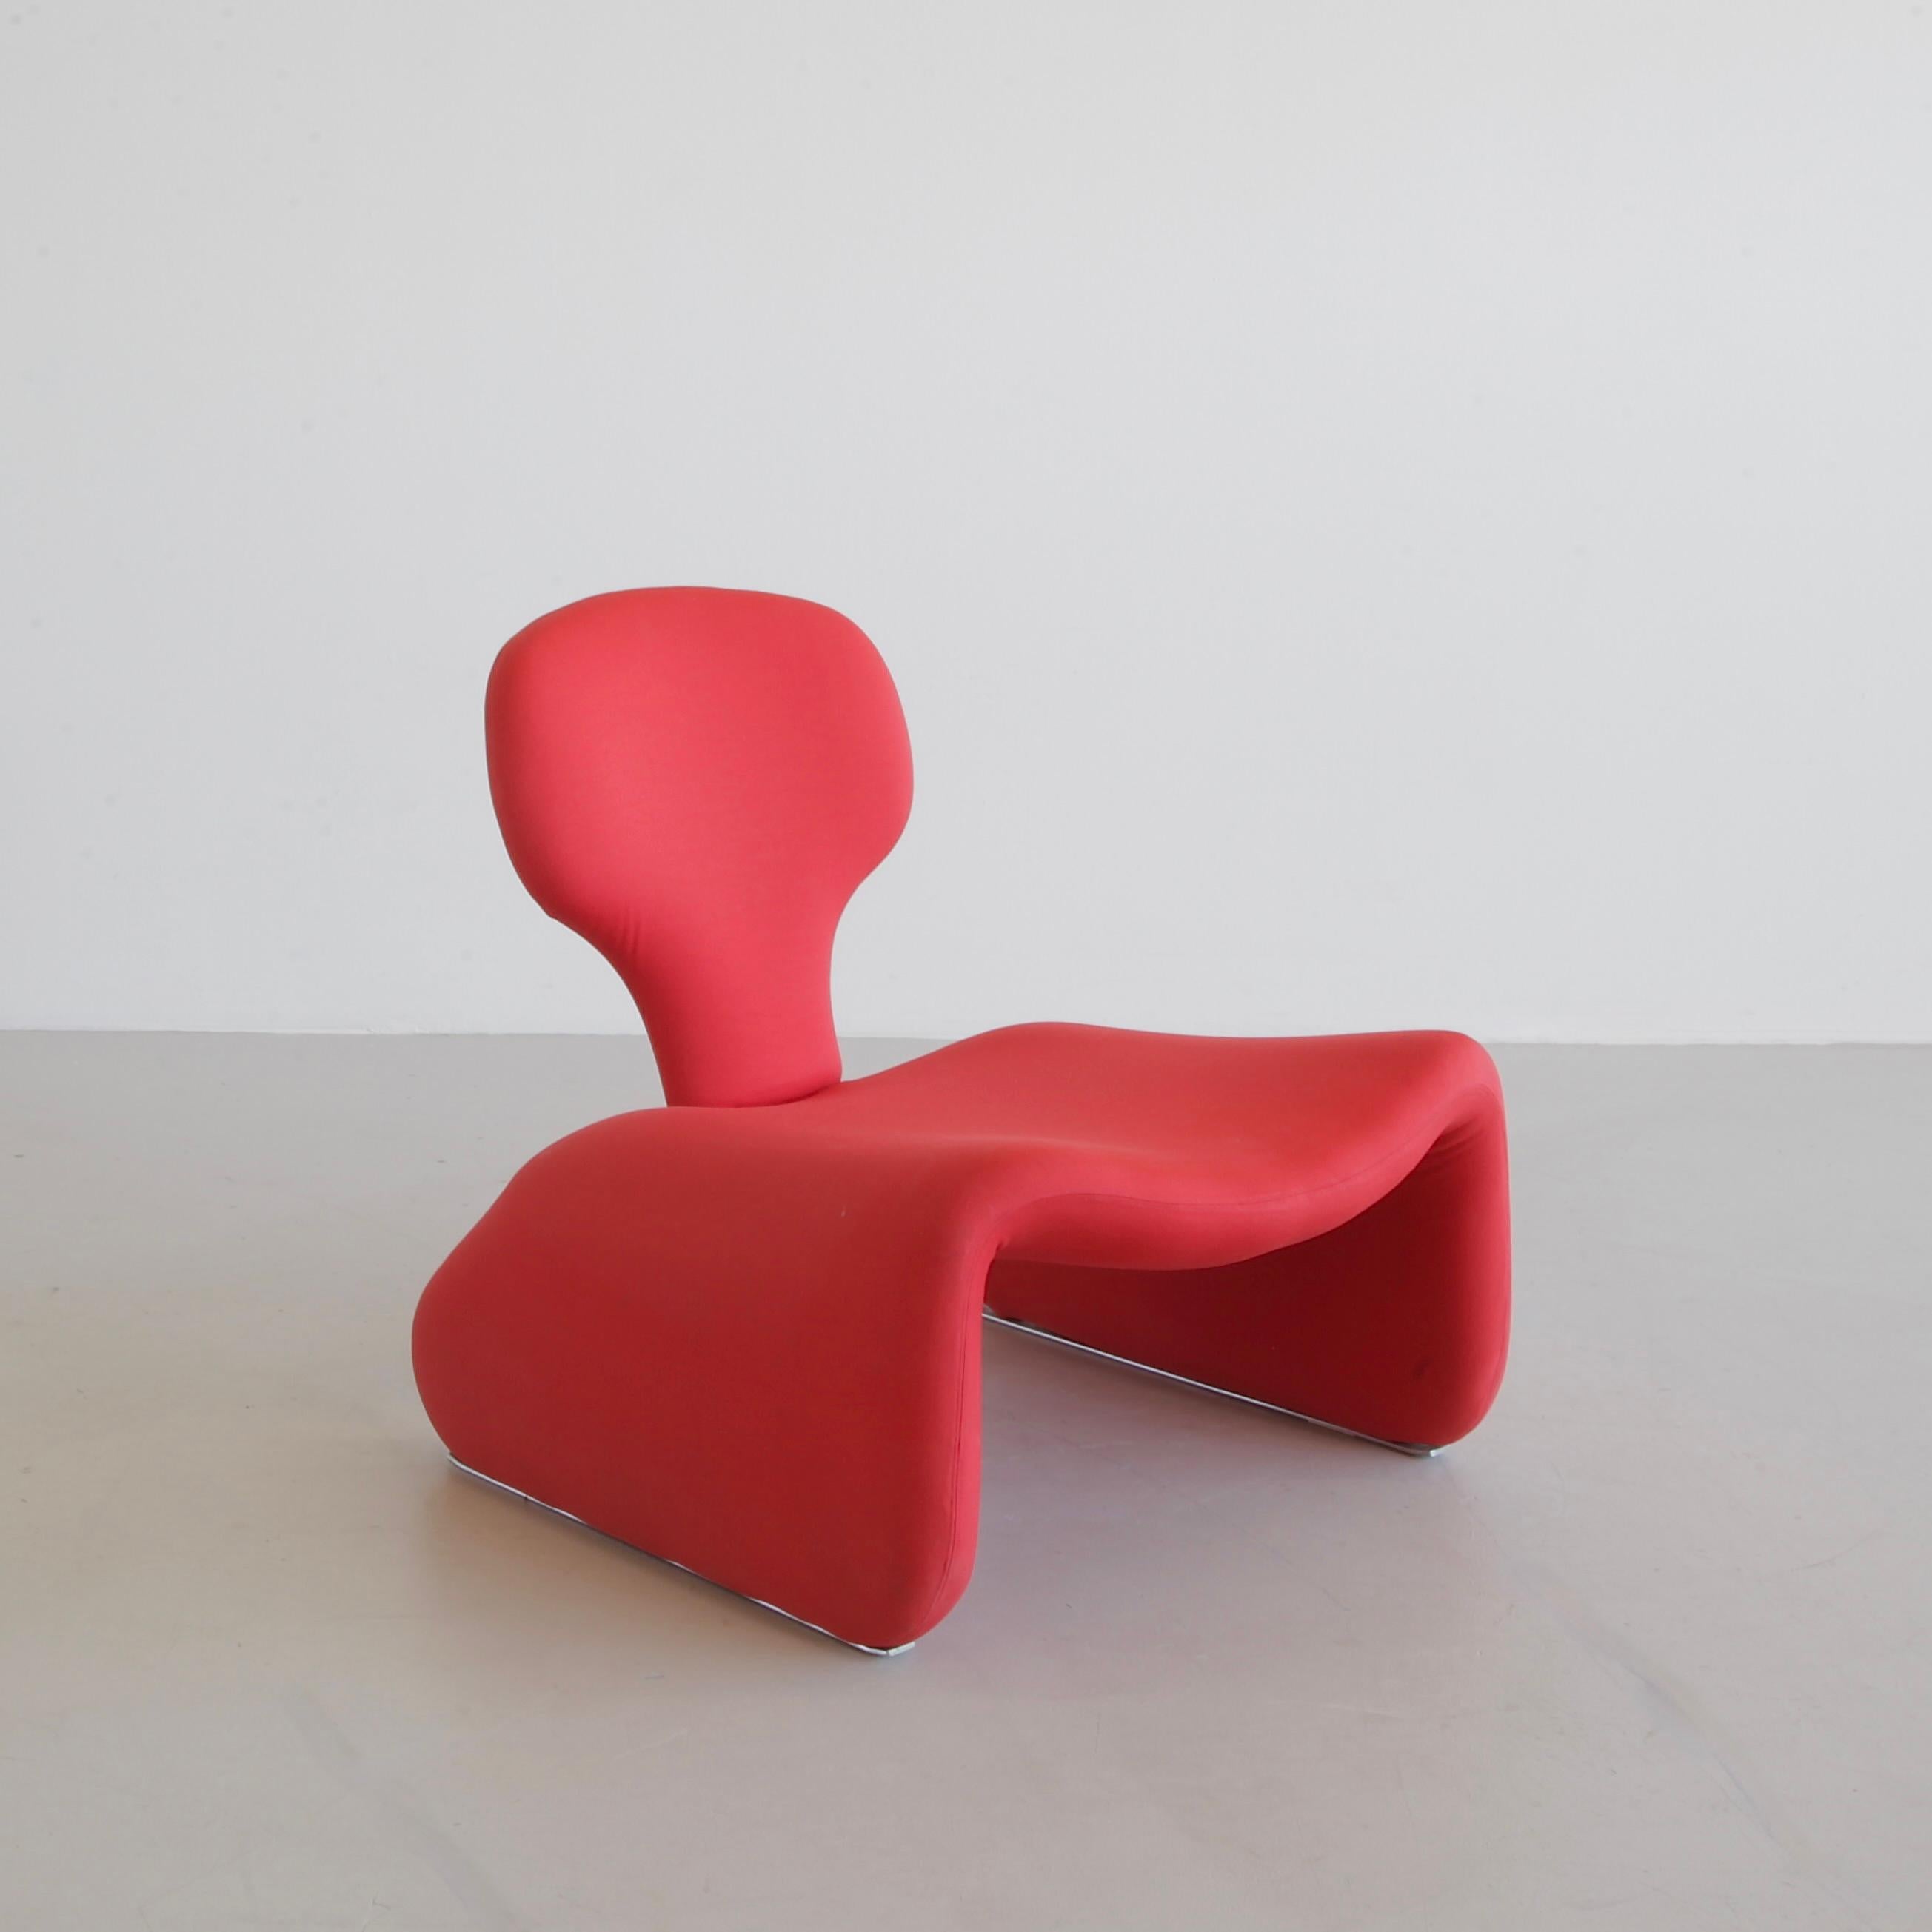 A set of the DIJNN Chair and Footstool in the original red stretch fabric. Metal construction with fabric and metal sliders.

The Djinn chair is one element of a series of Djinn furniture designed by noted French designer Olivier Mourgue. In 1965